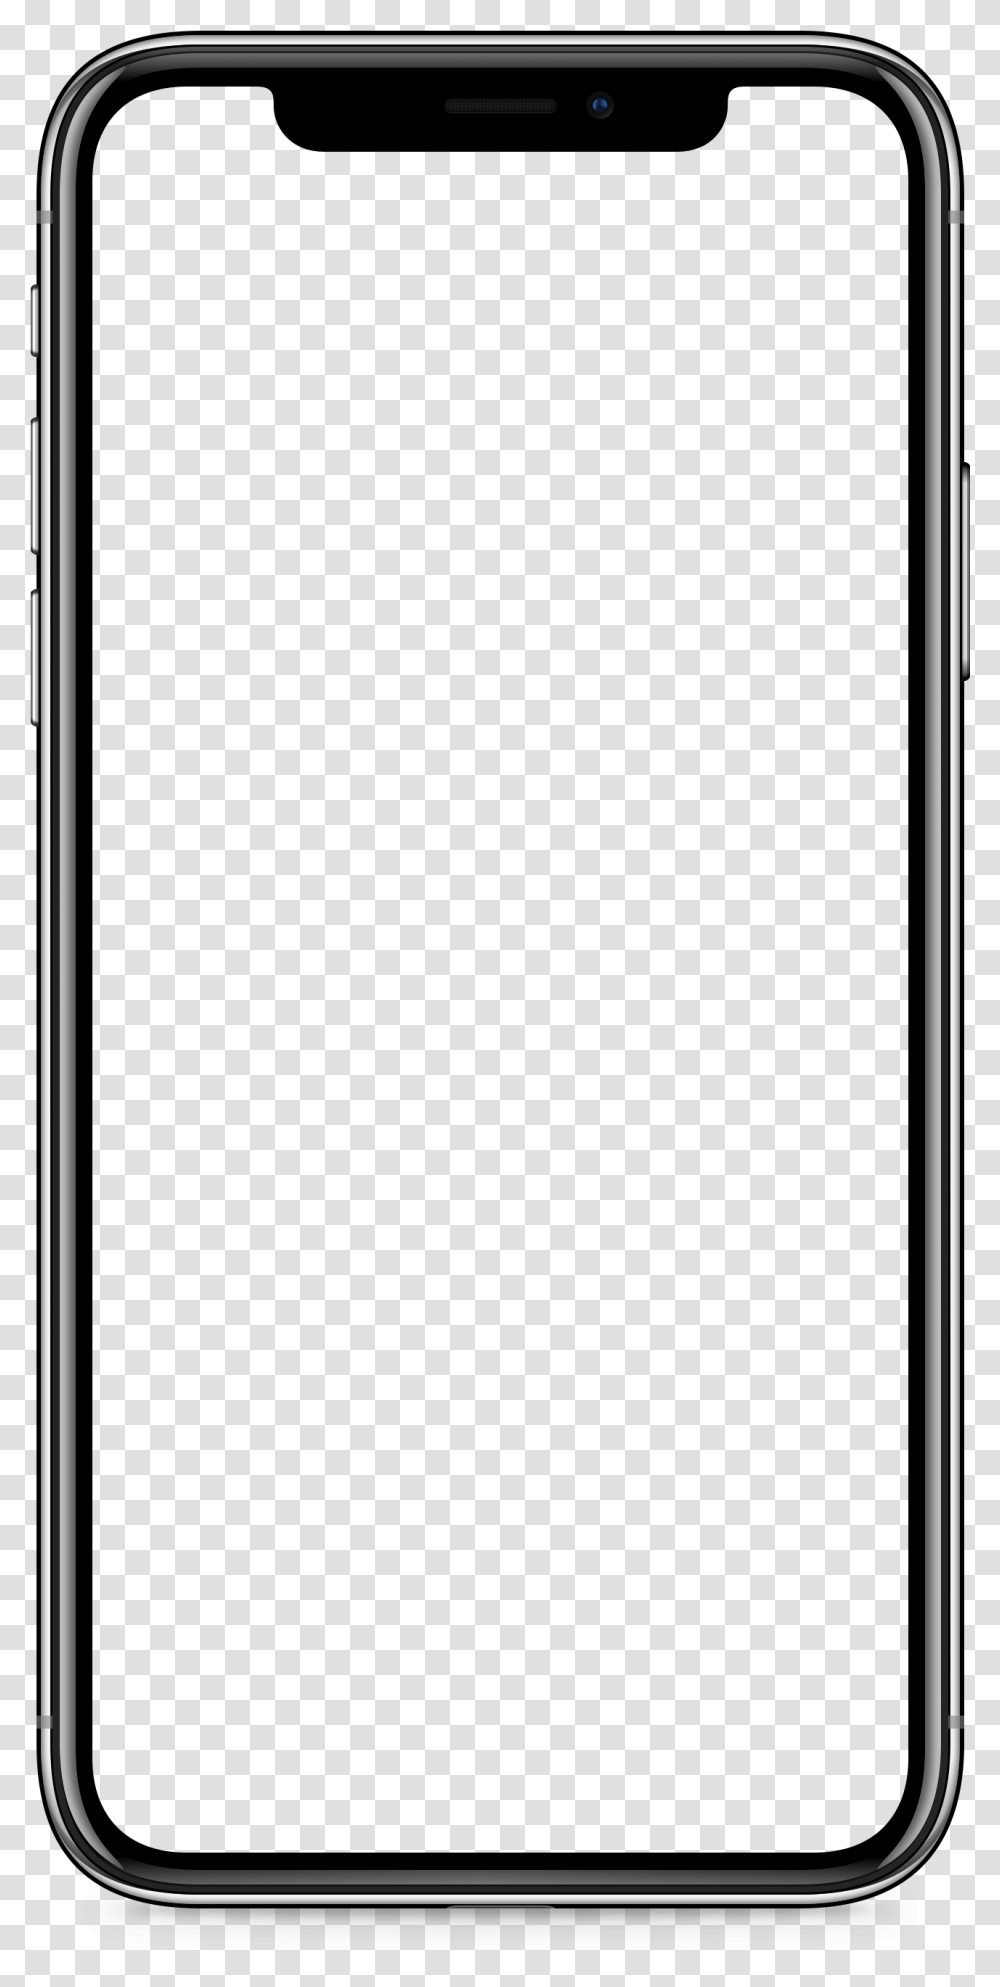 Iphone X With Agenda App Interactions Mobile Phone, Electronics, Cell Phone Transparent Png